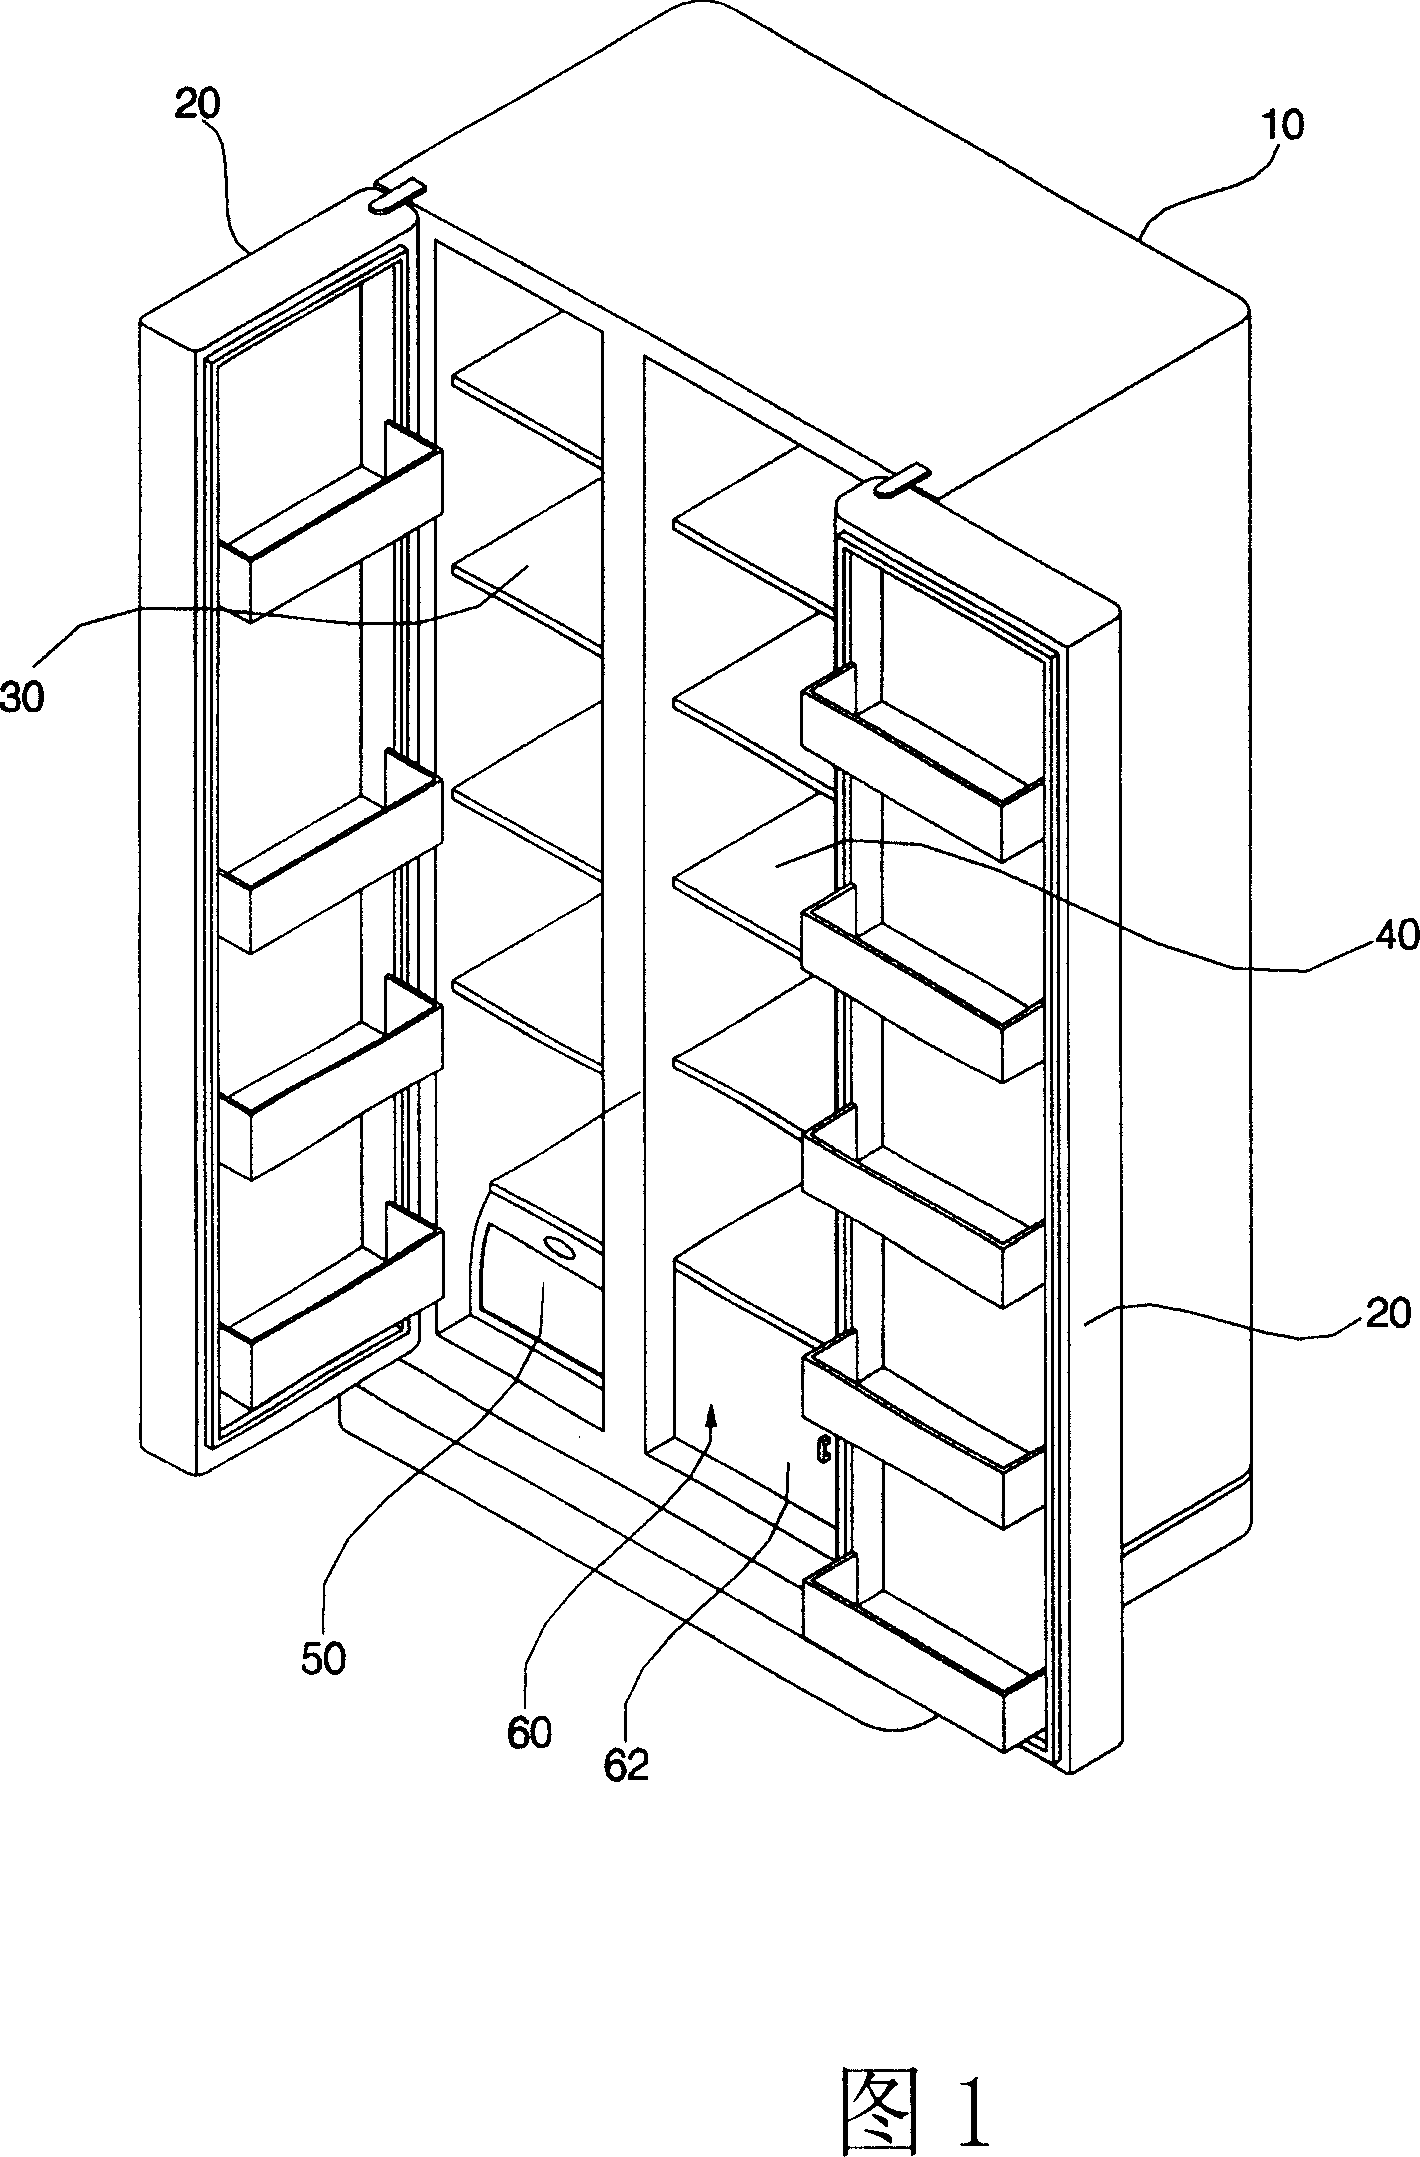 Thawing combined parts for refrigerator and thawing chamber